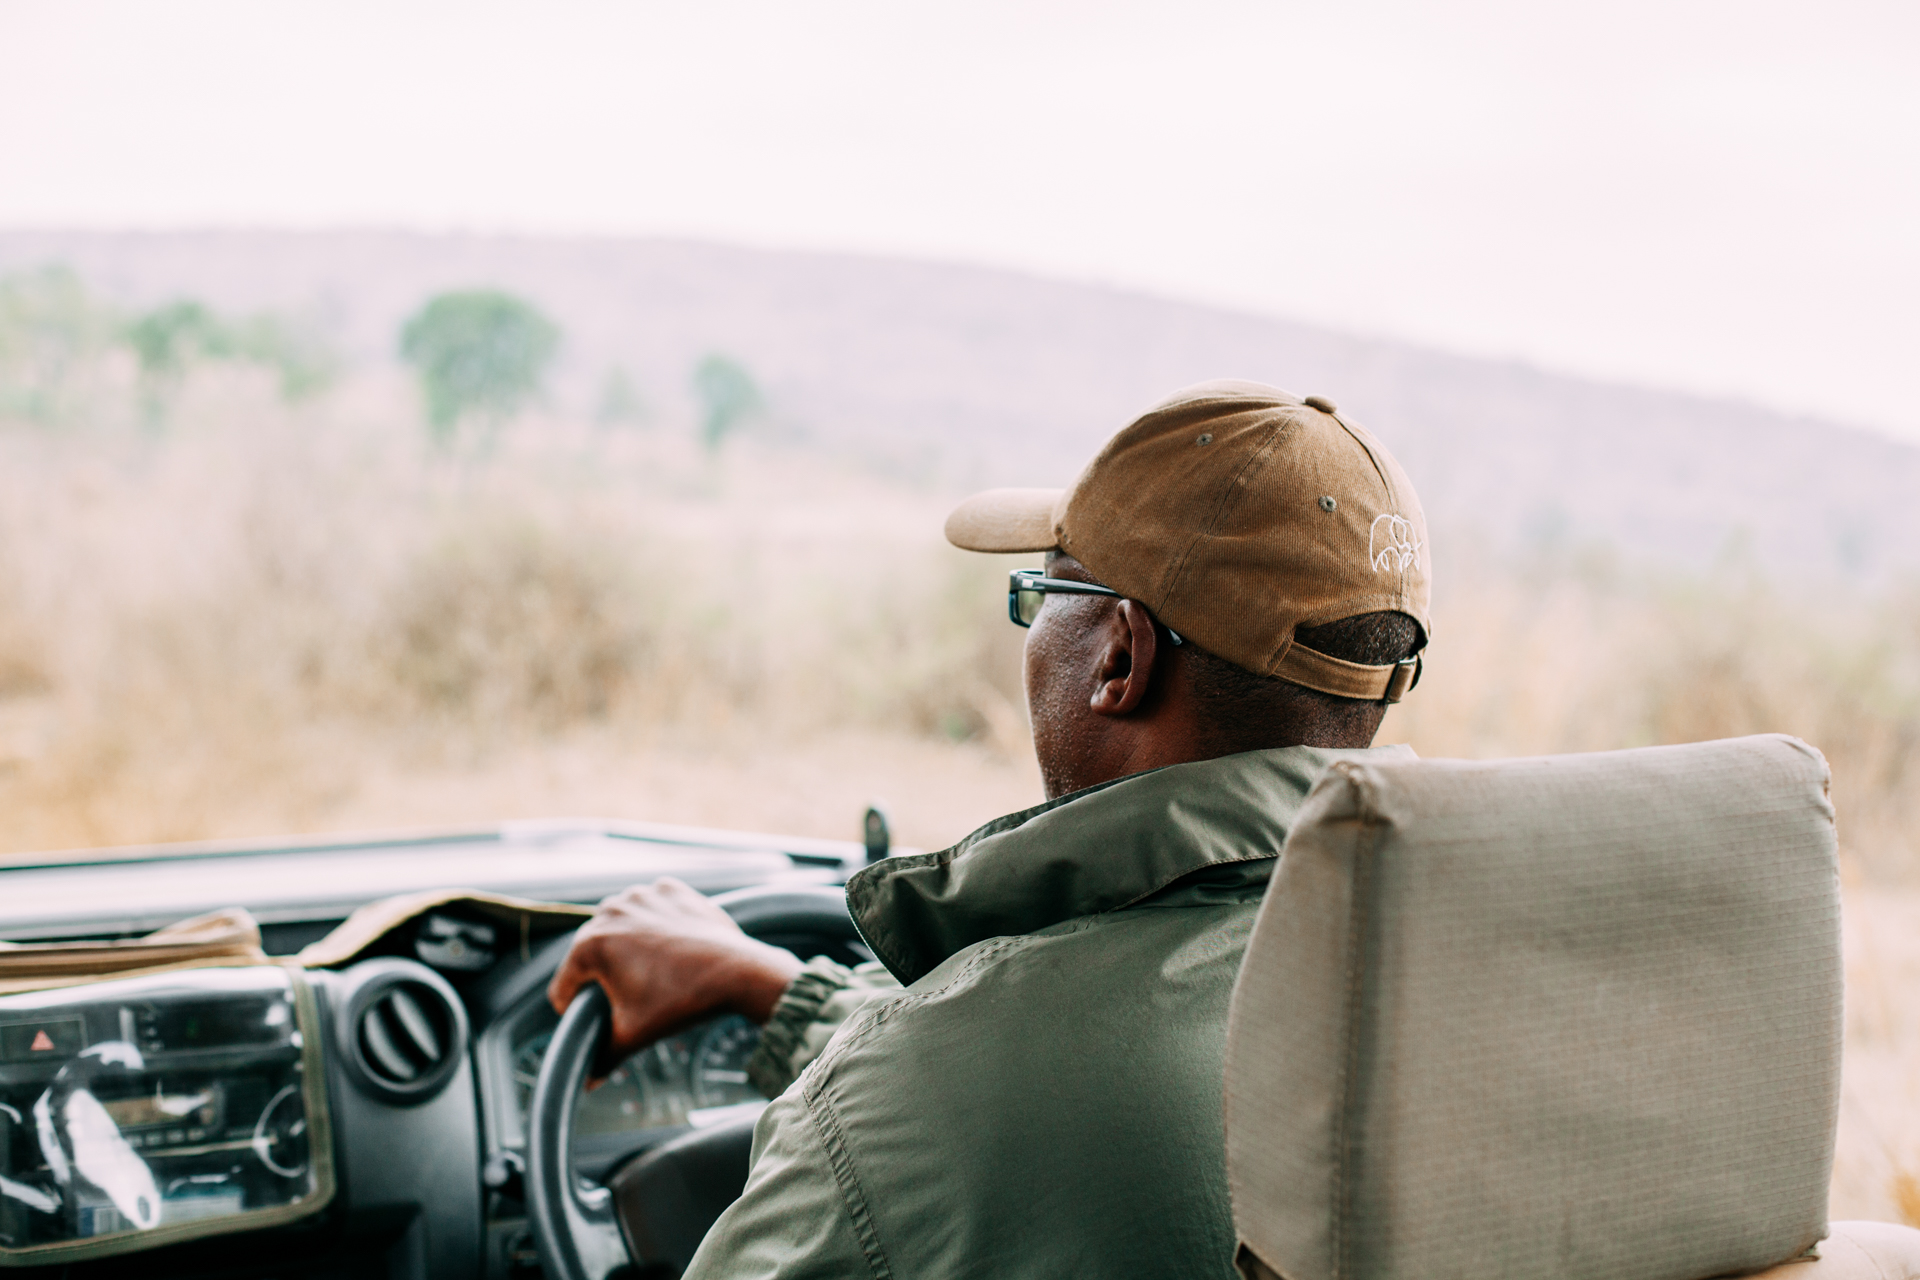 OUR INCREDIBLE GUIDES: I can only imagine how magical it must be to spend every day as a guide in the Welgevonden Private Game Reserve. It’s truly inspiring to hear the guides explain the smaller details of the land and the wildlife.